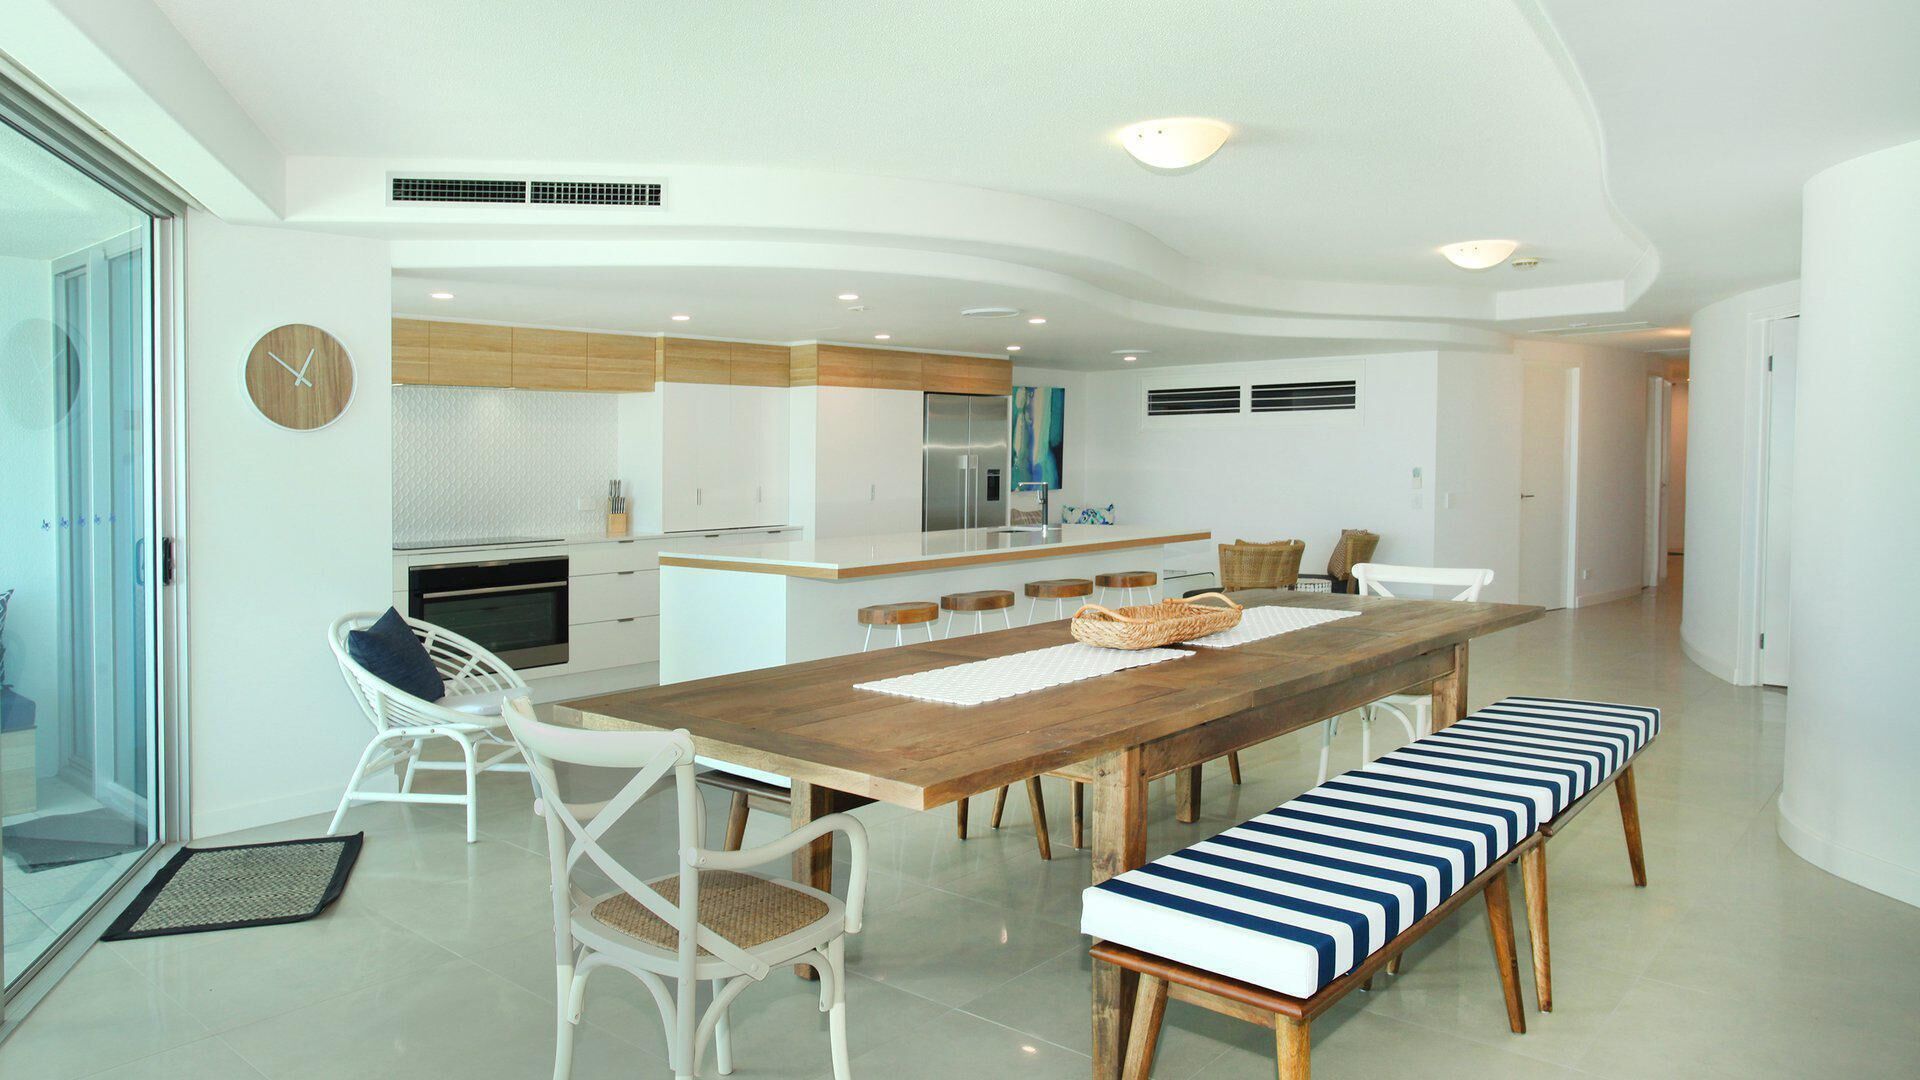 Sirocco 201 - Large Five Bedroom Apartment in Sirocco Resort with Private Balcony and BBQ!